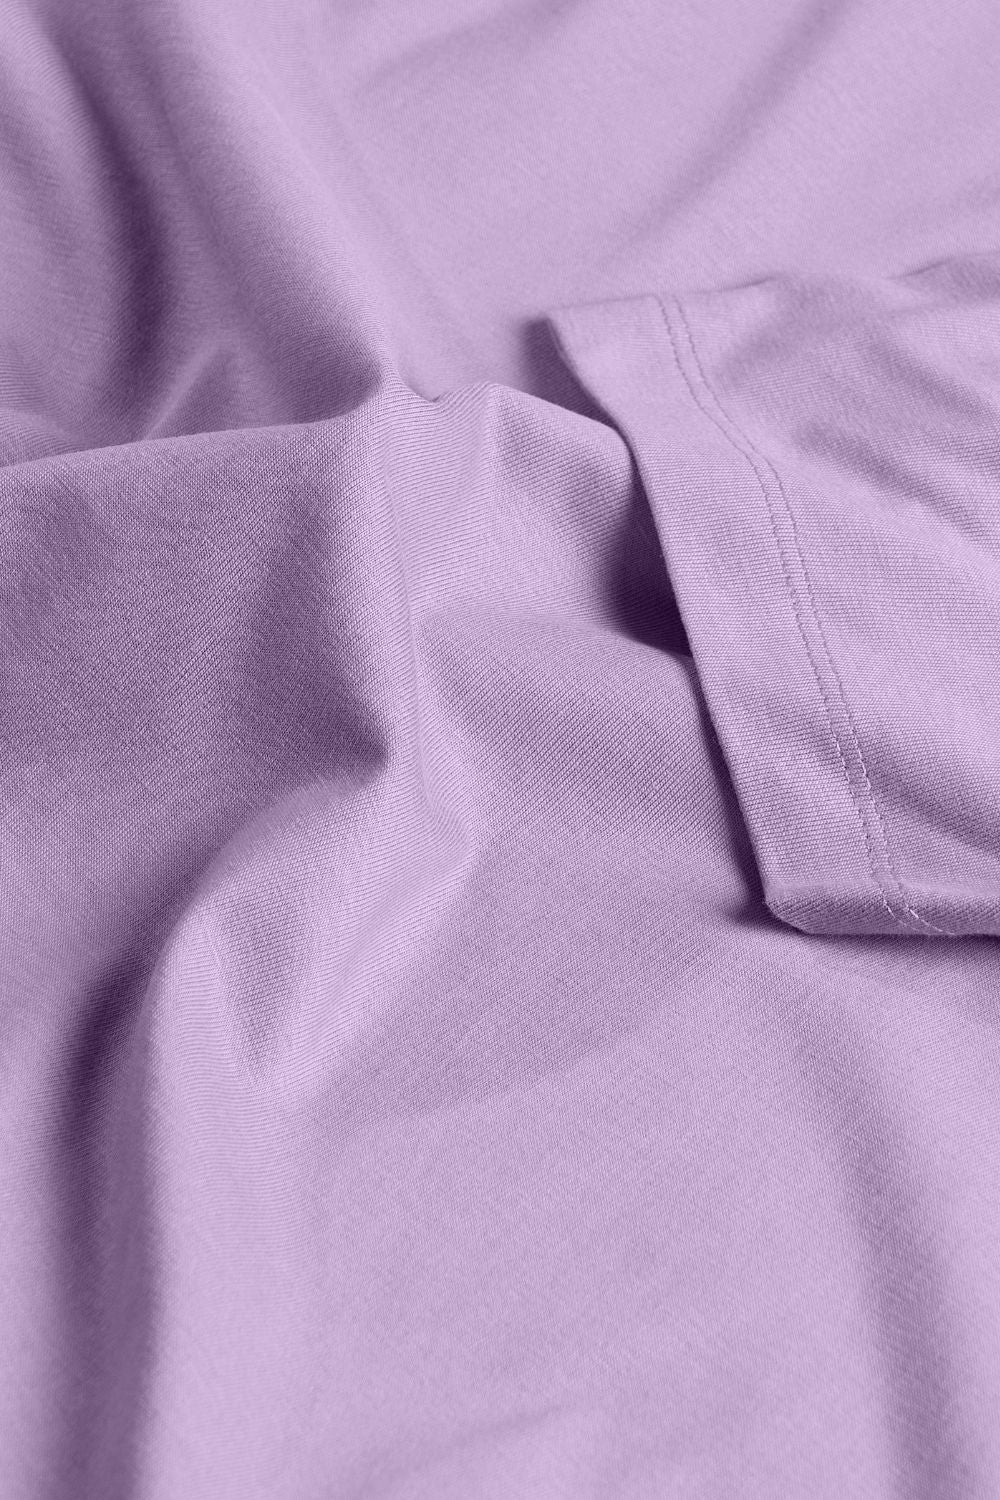 Solid T shirt for men in the color Purple  with half sleeves and round neck, fabric close up.